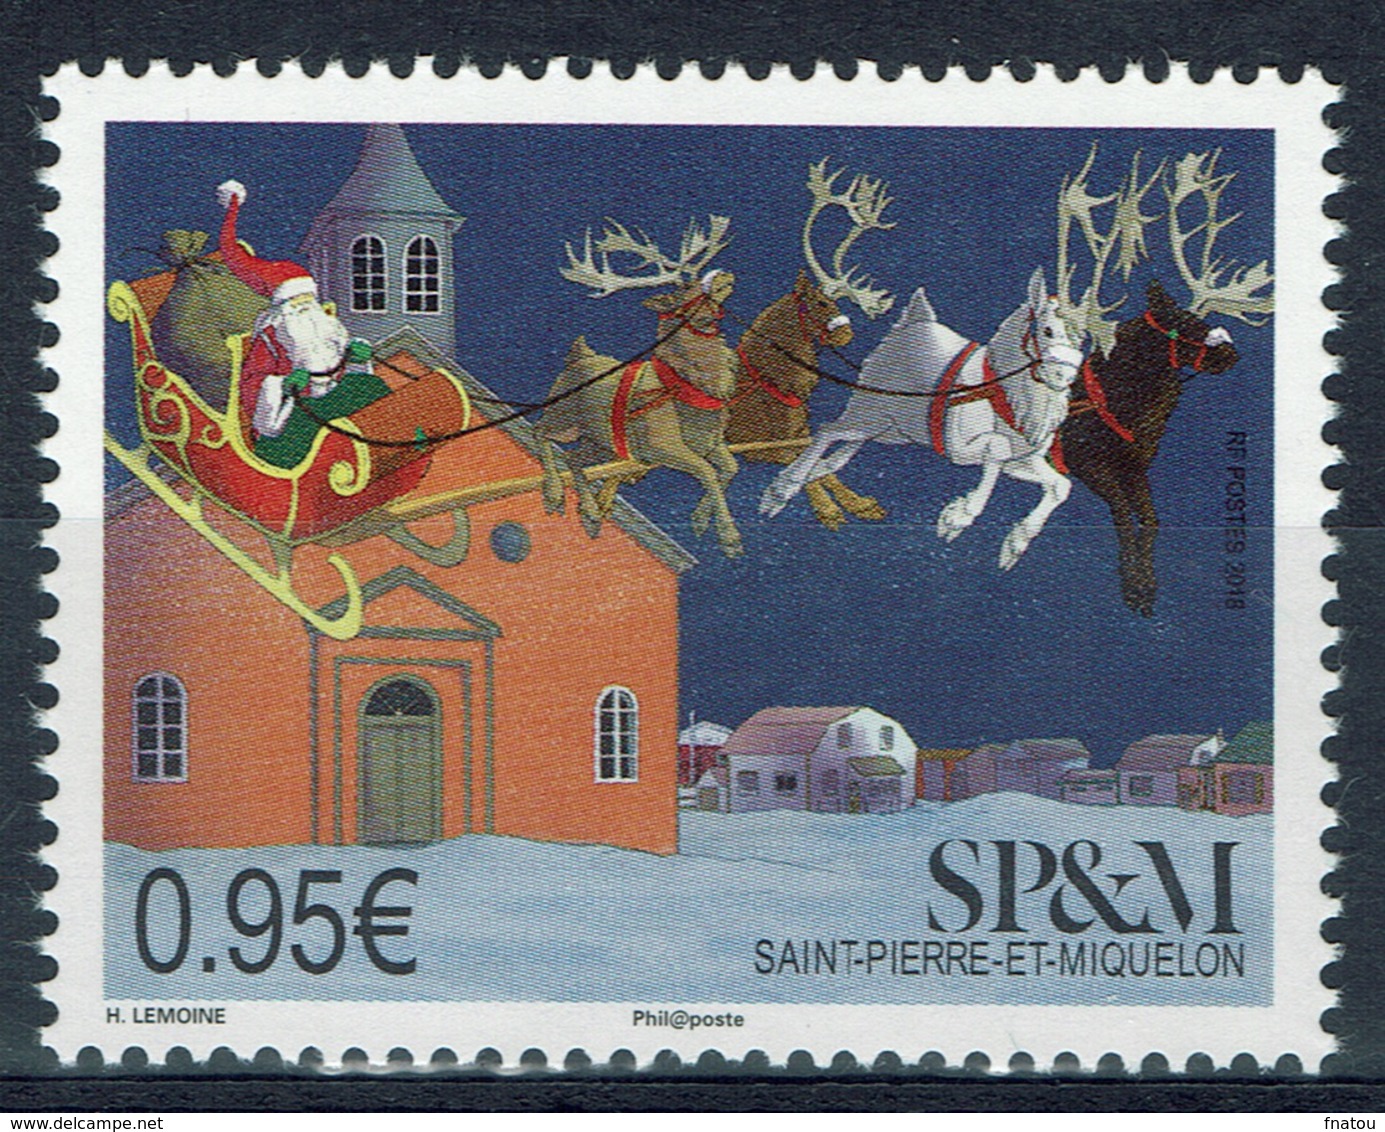 Saint Pierre And Miquelon, Christmas, 2018, MNH VF - Unused Stamps